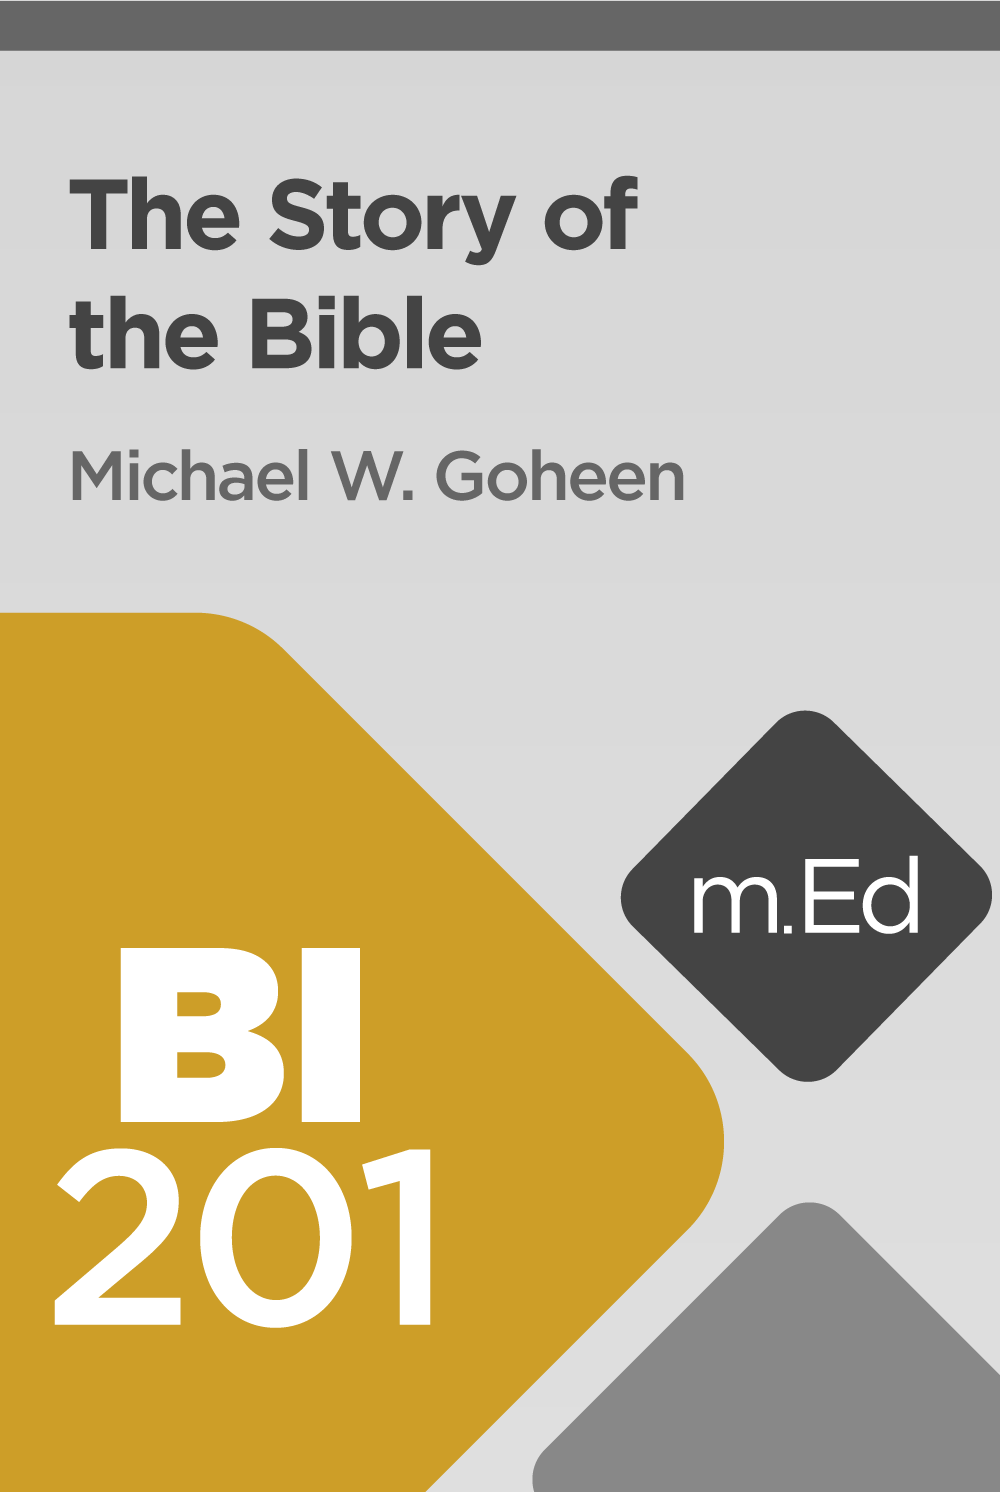 Mobile Ed: BI201 The Story of the Bible (6 hour course)